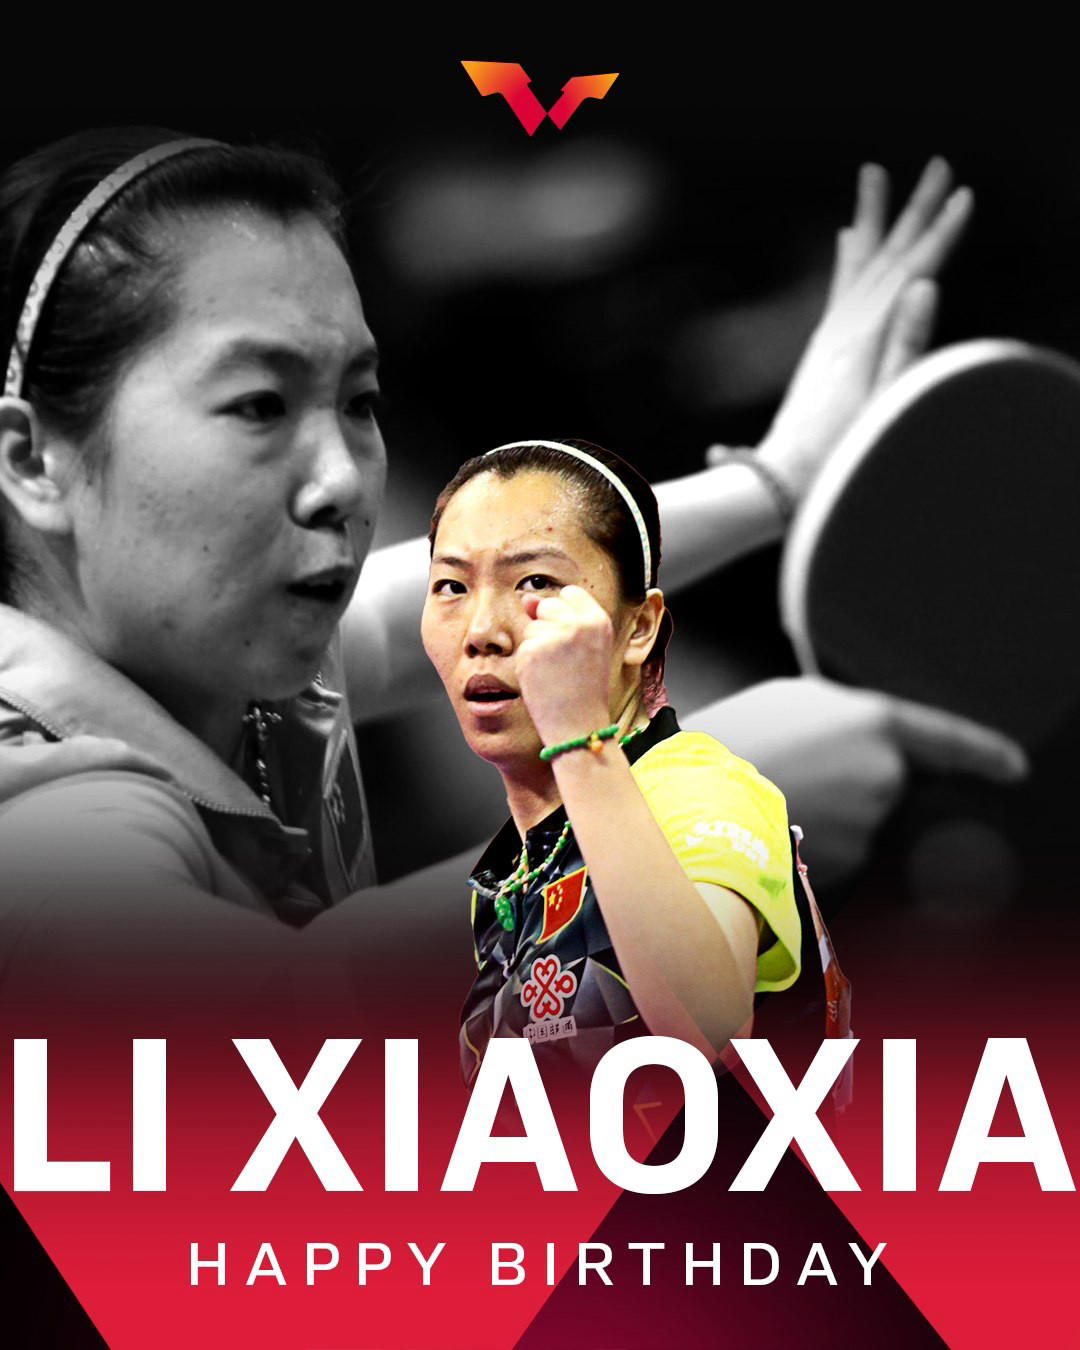 Birthday wishes go out to Li Xiaoxia